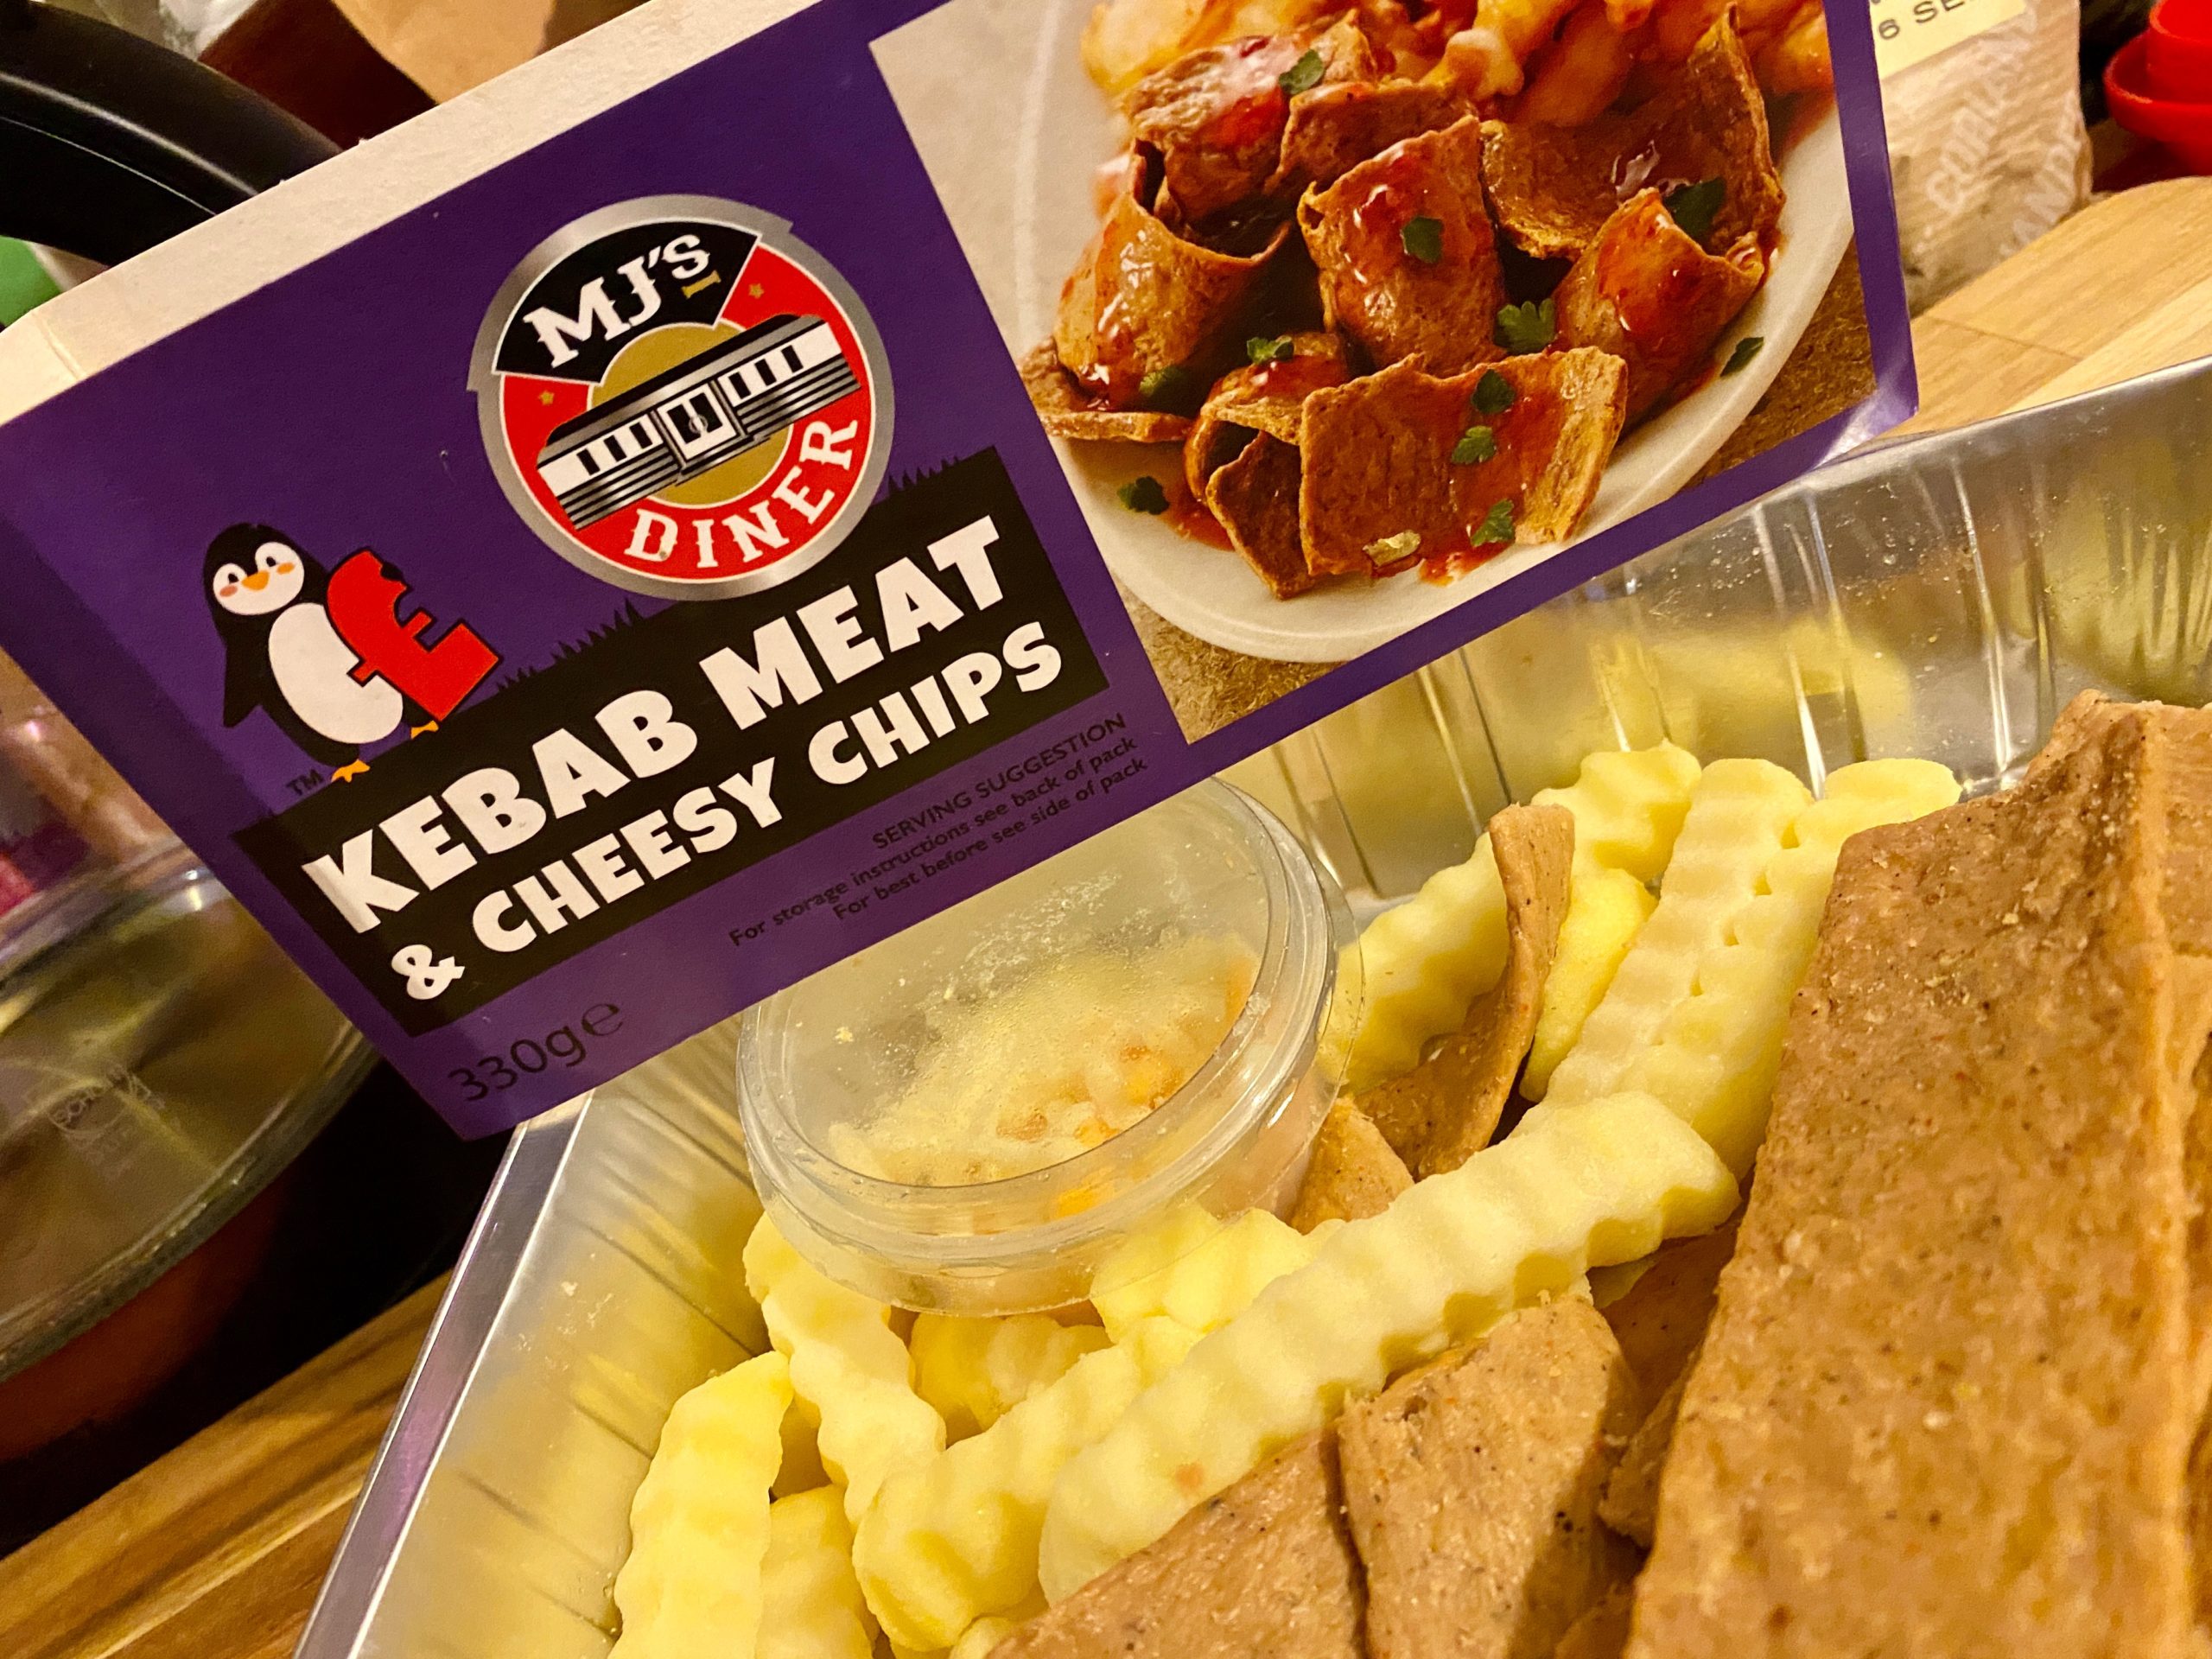 Kebab meat and cheesy chips before cooking